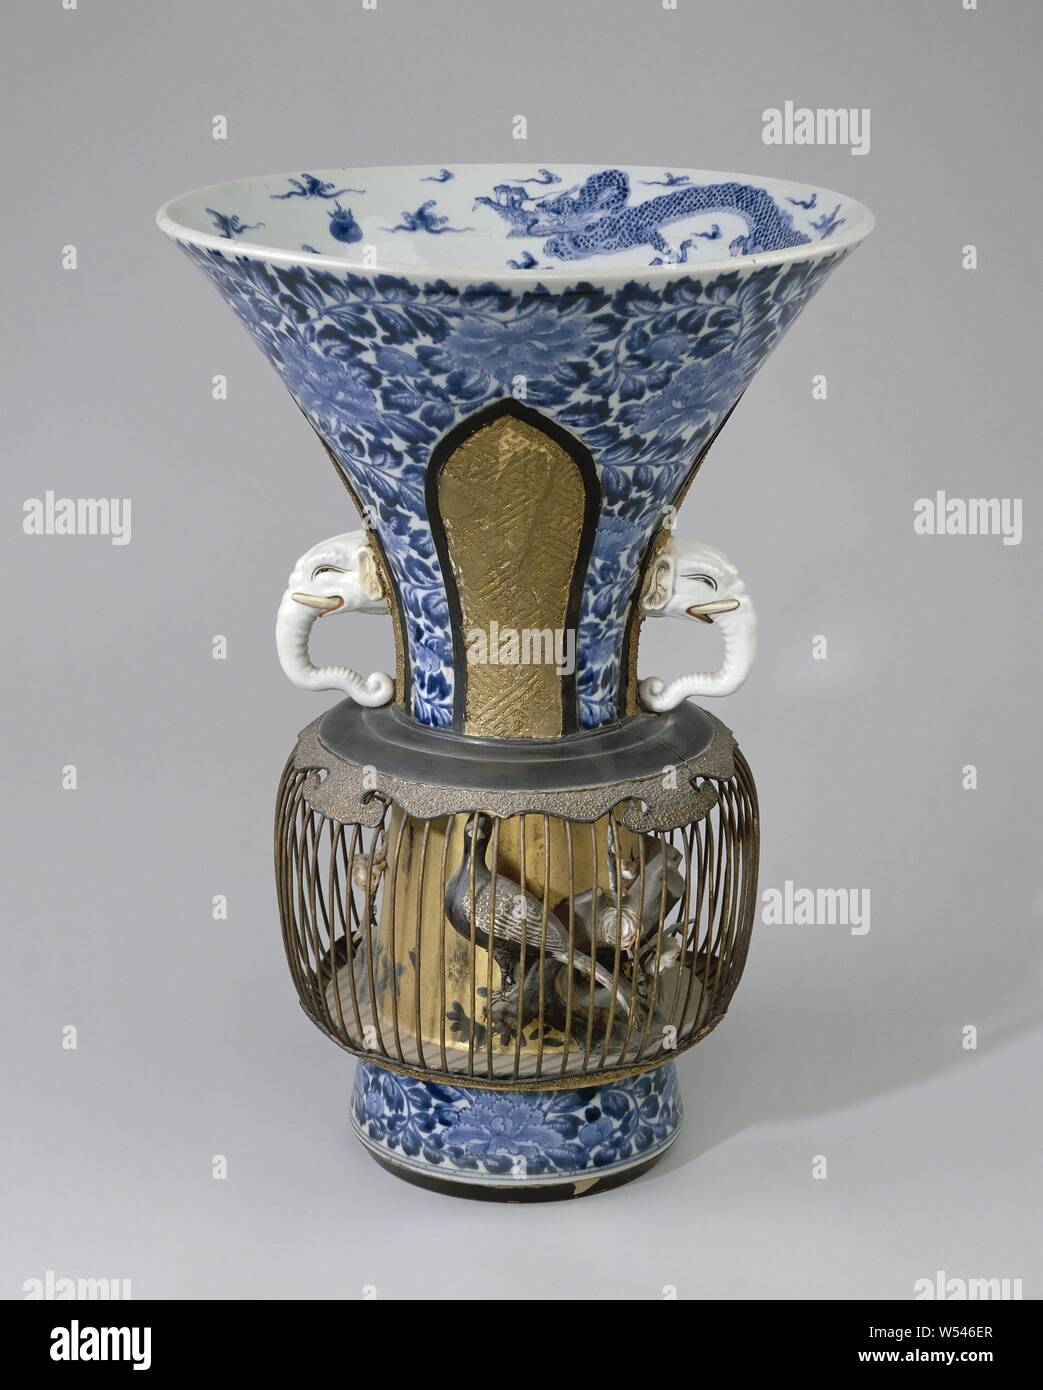 Trumpet-shaped beakervase with a metal birdcage, Trumpet-shaped porcelain vase, painted in underglaze blue and on the enamel red, black and gold. On the wall a pattern of peonies interrupted by four recessed, leaf-shaped boxes with a swastika or grainy pattern in gilt paper mâché. An ear in the shape of an elephant's head in two compartments. A metal bird cage has been placed under these ears around the vase, resting on varnished wooden edges. Below the top edge a band with four ruyi motifs of gilt paper mâché. Rocks, branches and a pair of male and female green pheasant (Phasianus versicolor Stock Photo